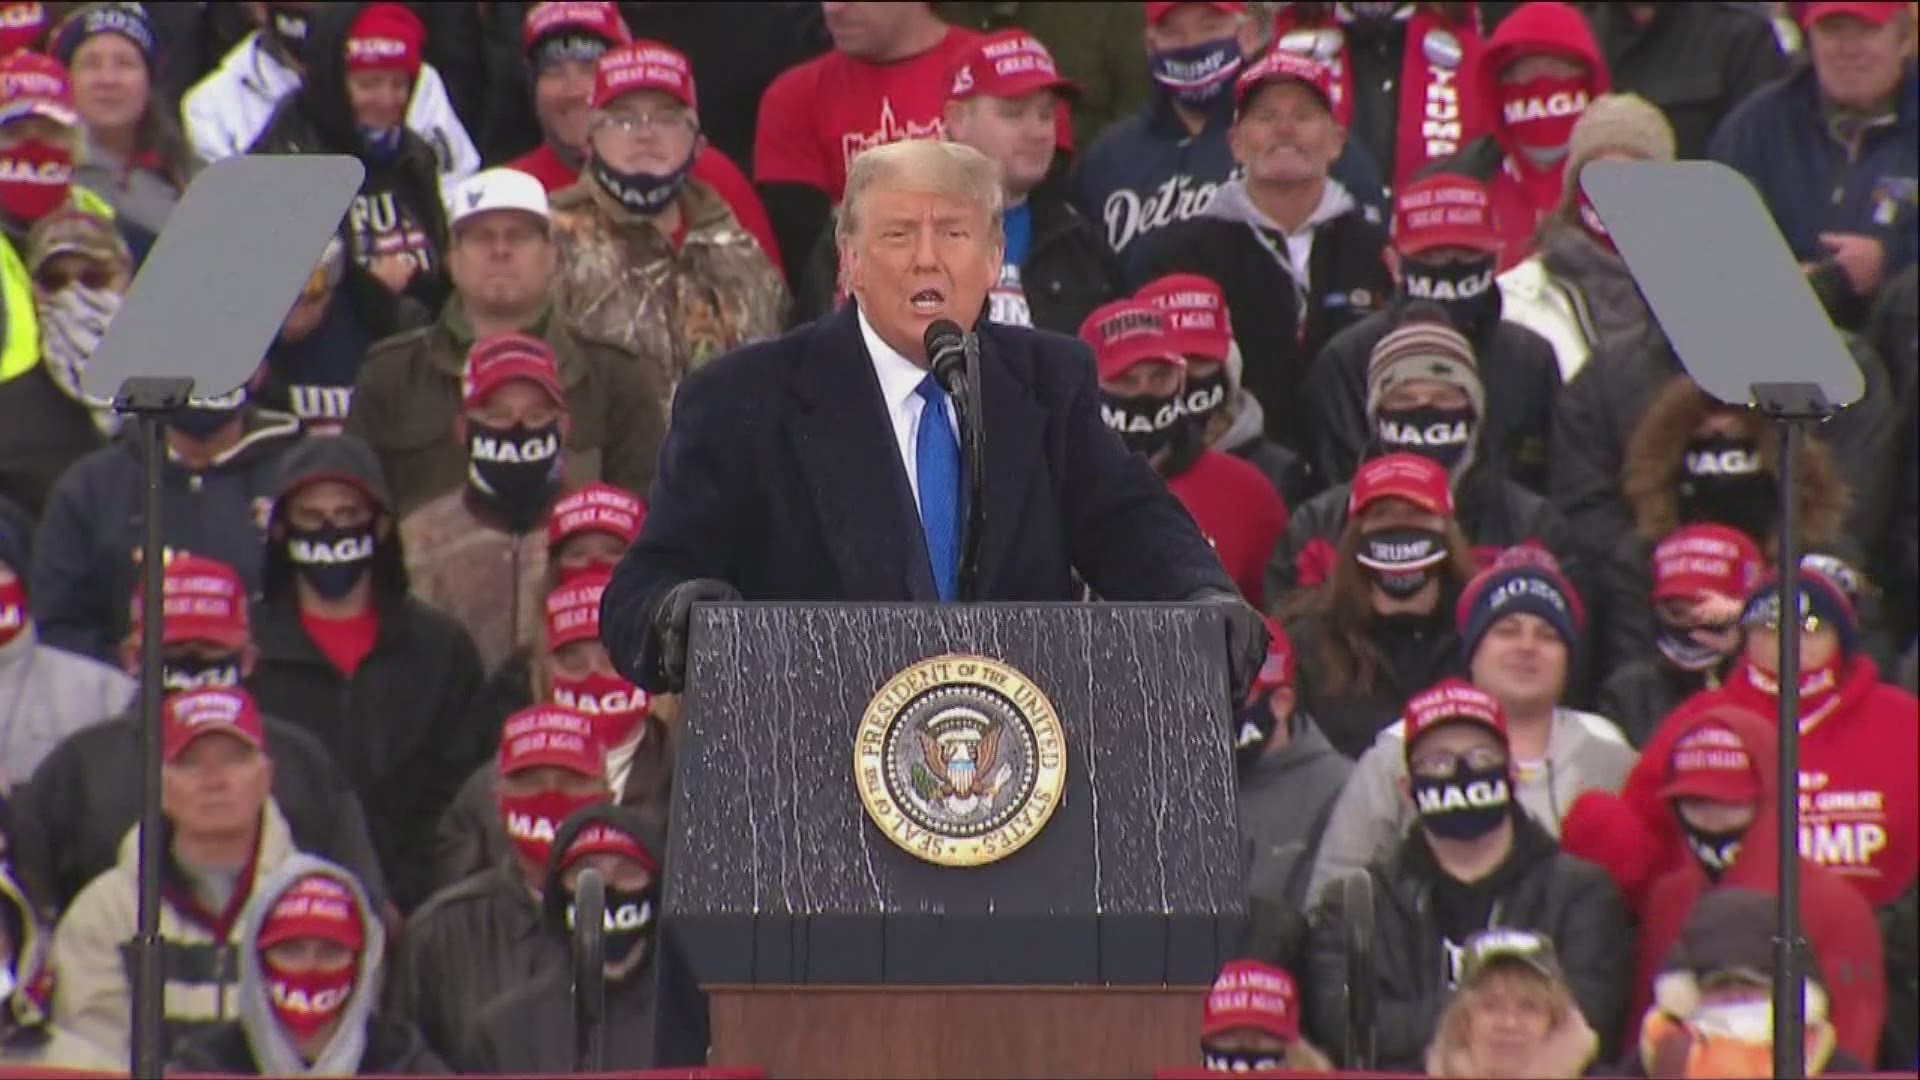 President Donald Trump criticize Biden and Whitmer during his rally in Lansing.